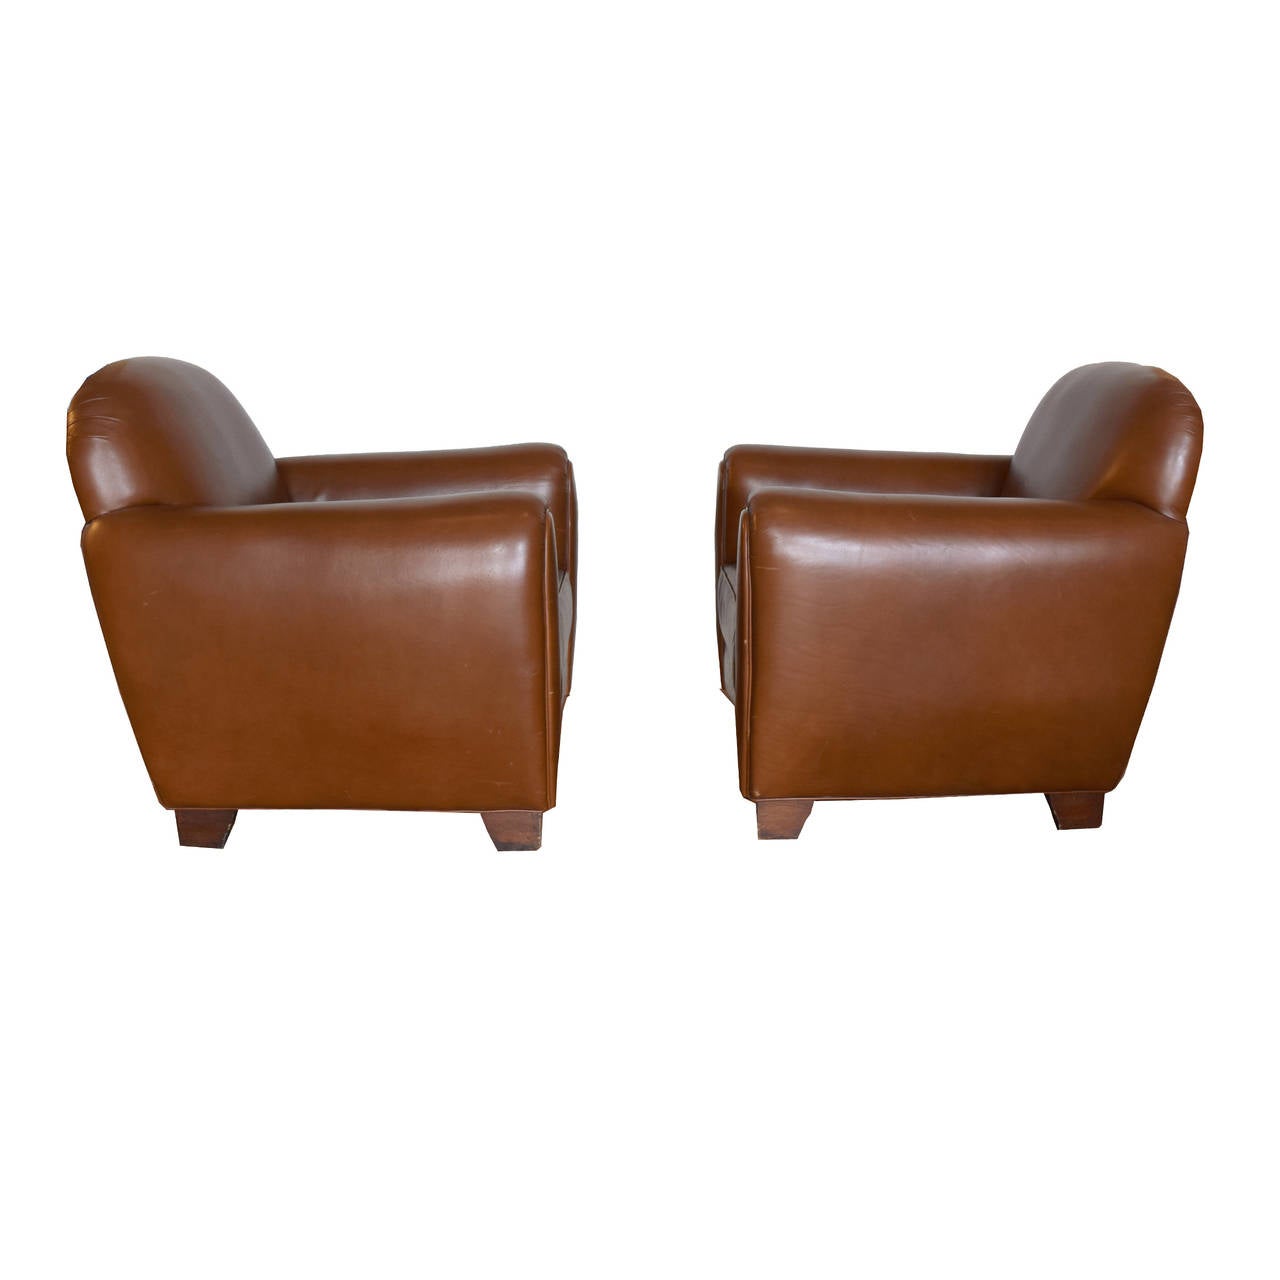 Pair of vintage French club chairs reupholstered in brown leather, purchased in Buenos Aires, Argentina.